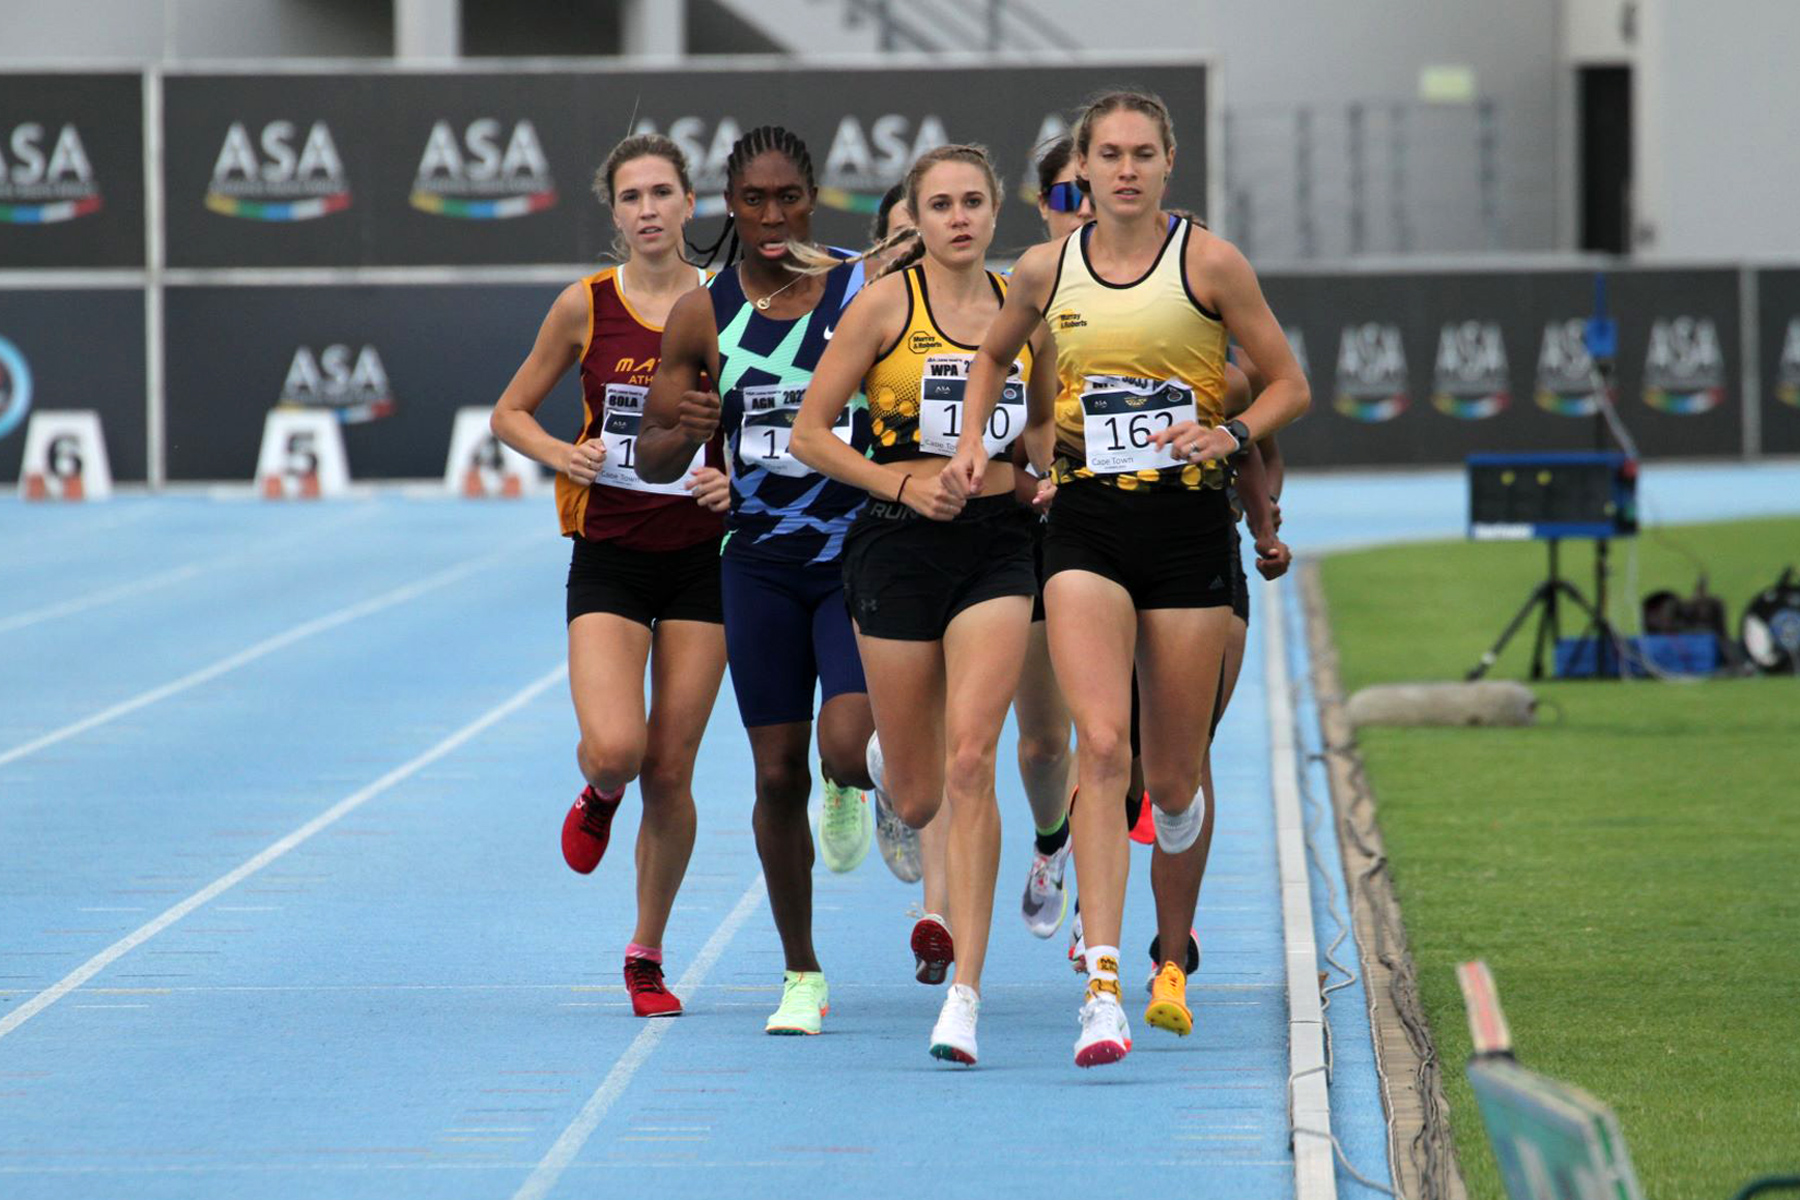 Caster Semenya clocked a personal best of 8:54.97 to win the women’s 3,000m in Cape Town / Credit: Tladi Khuele